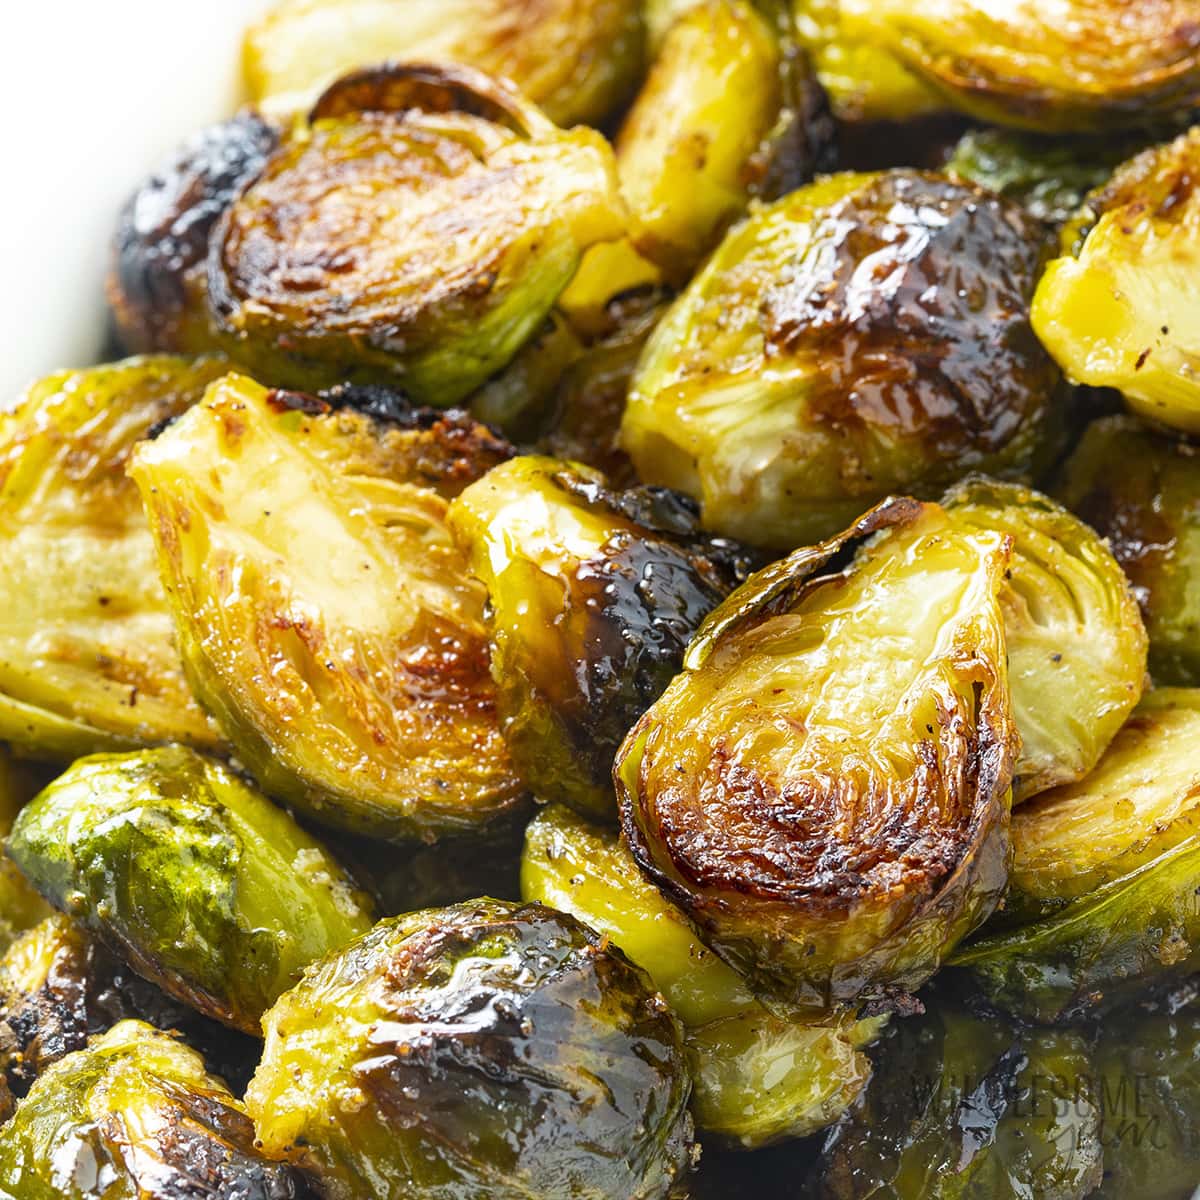 Oven roasted brussels sprouts recipe close up.